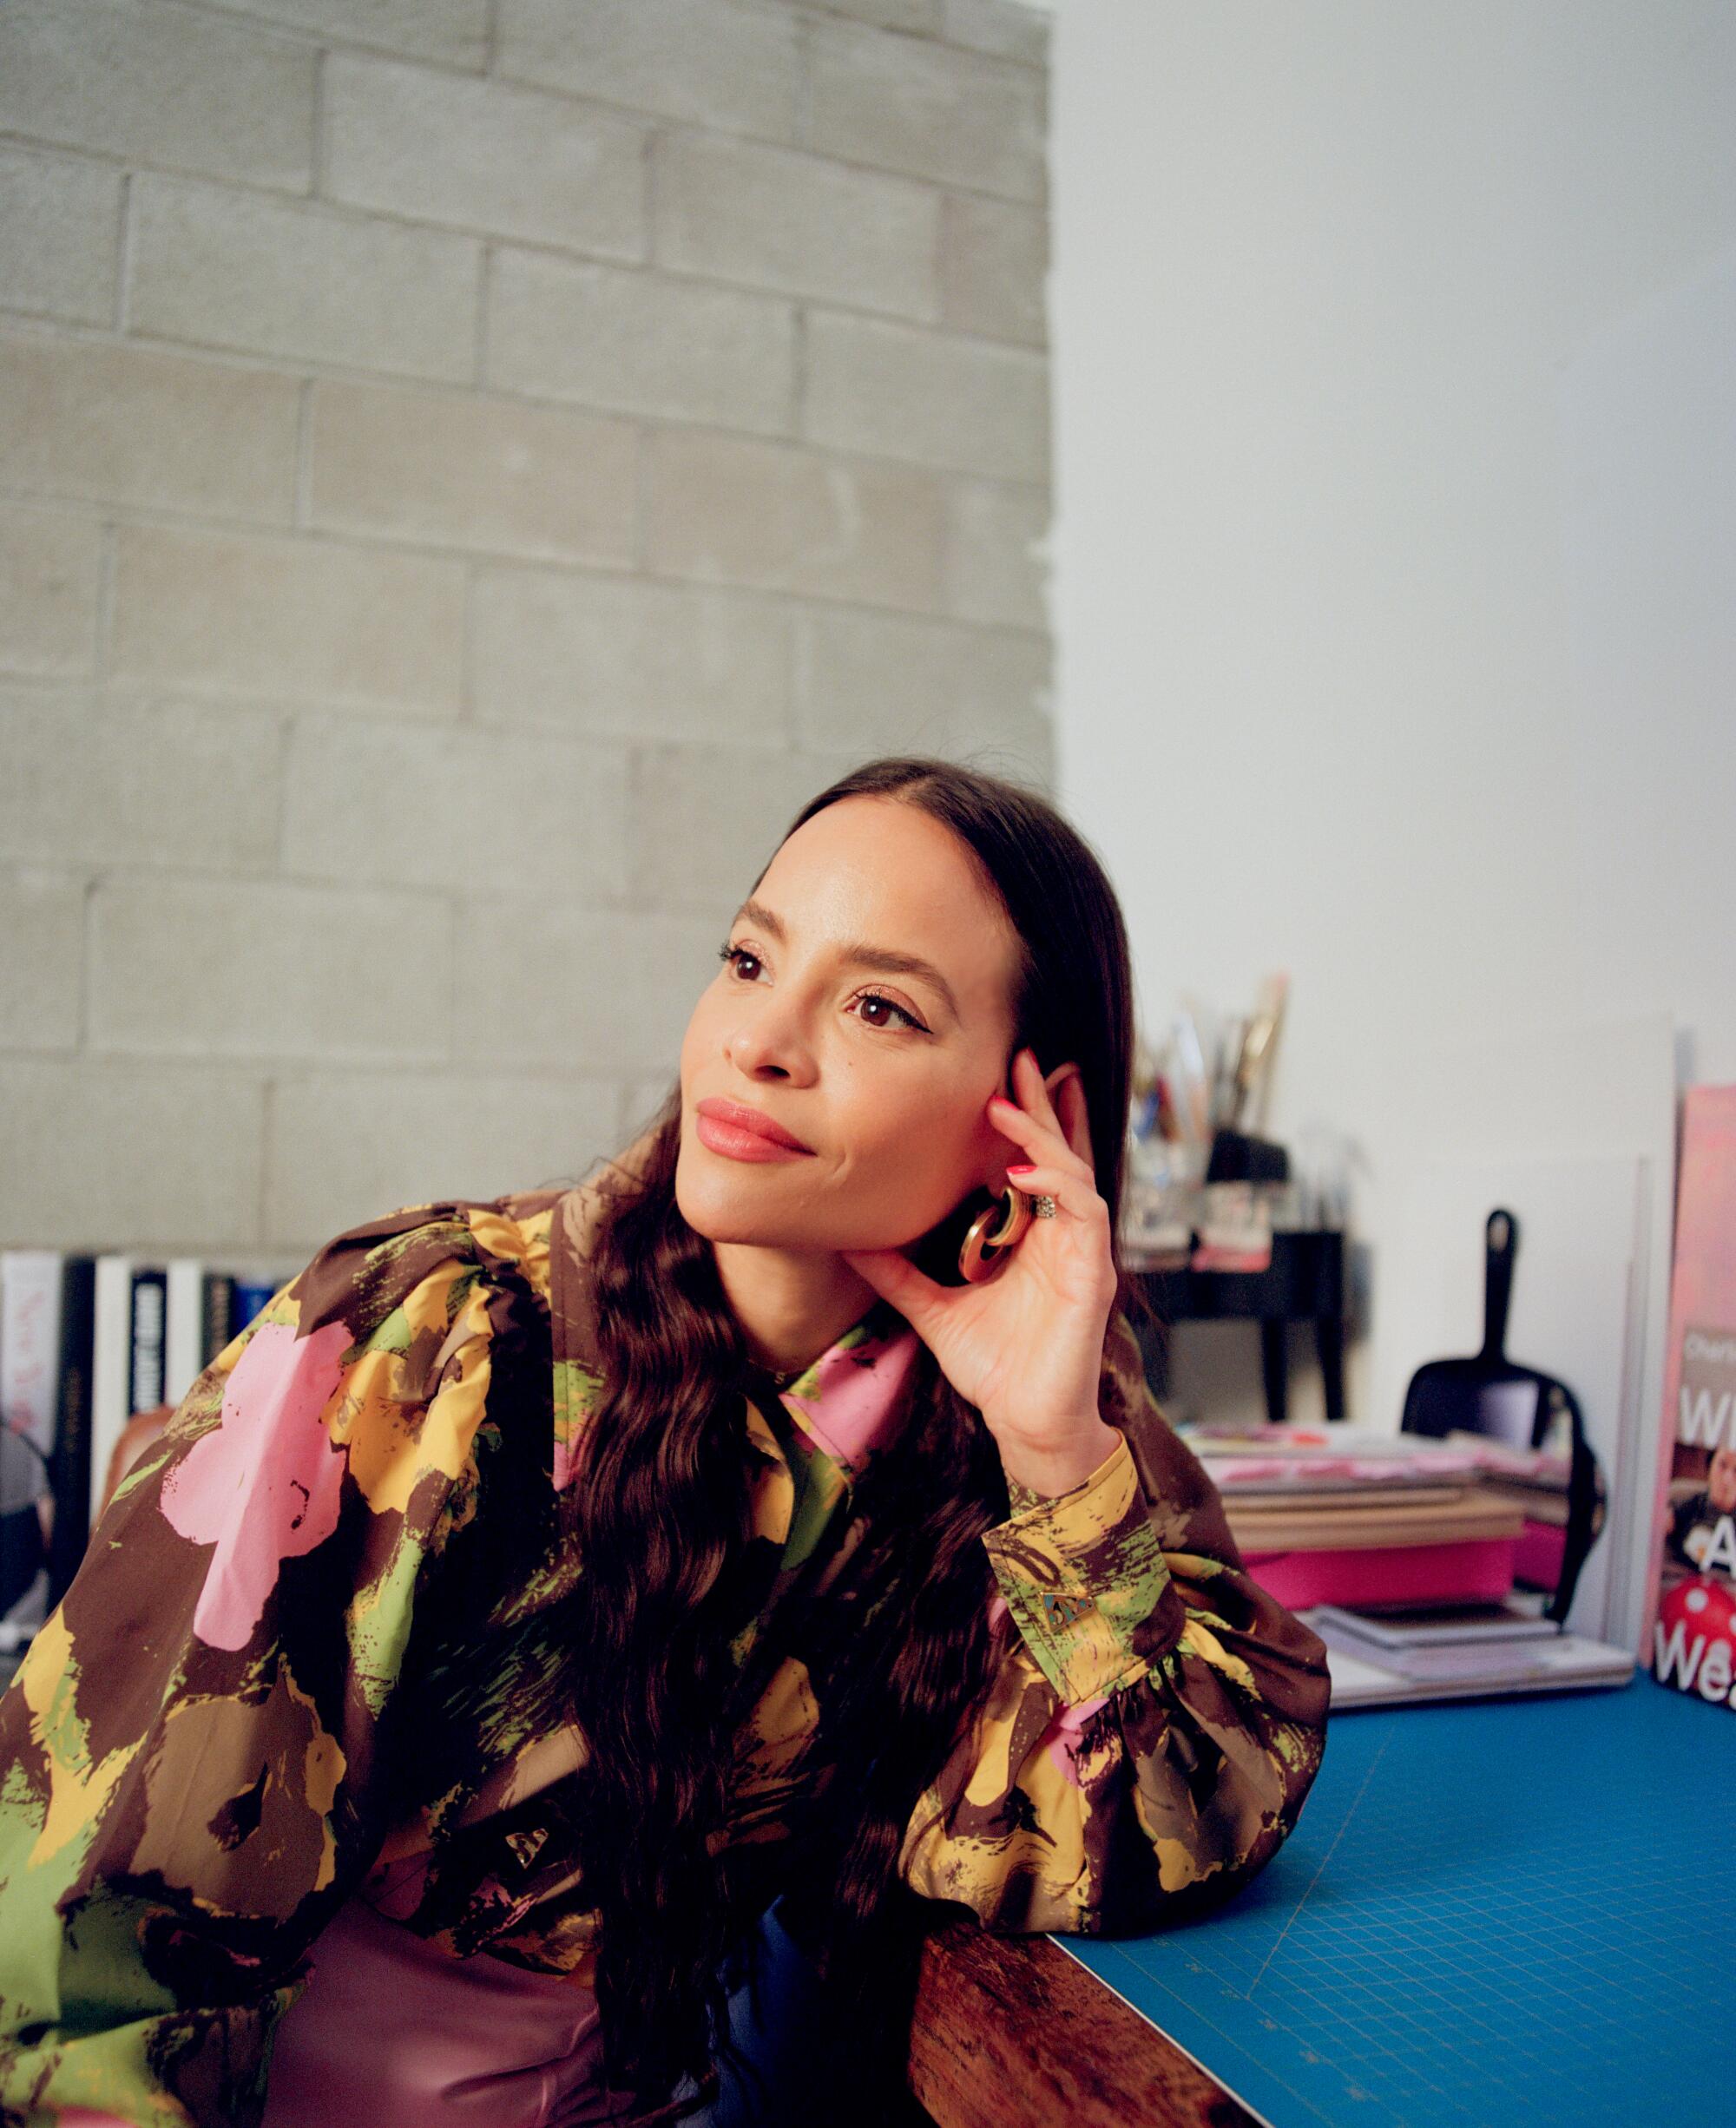 Sophie Lopez, wearing a colorful blouse, leans her head toward her hand, her elbow resting on a desk.